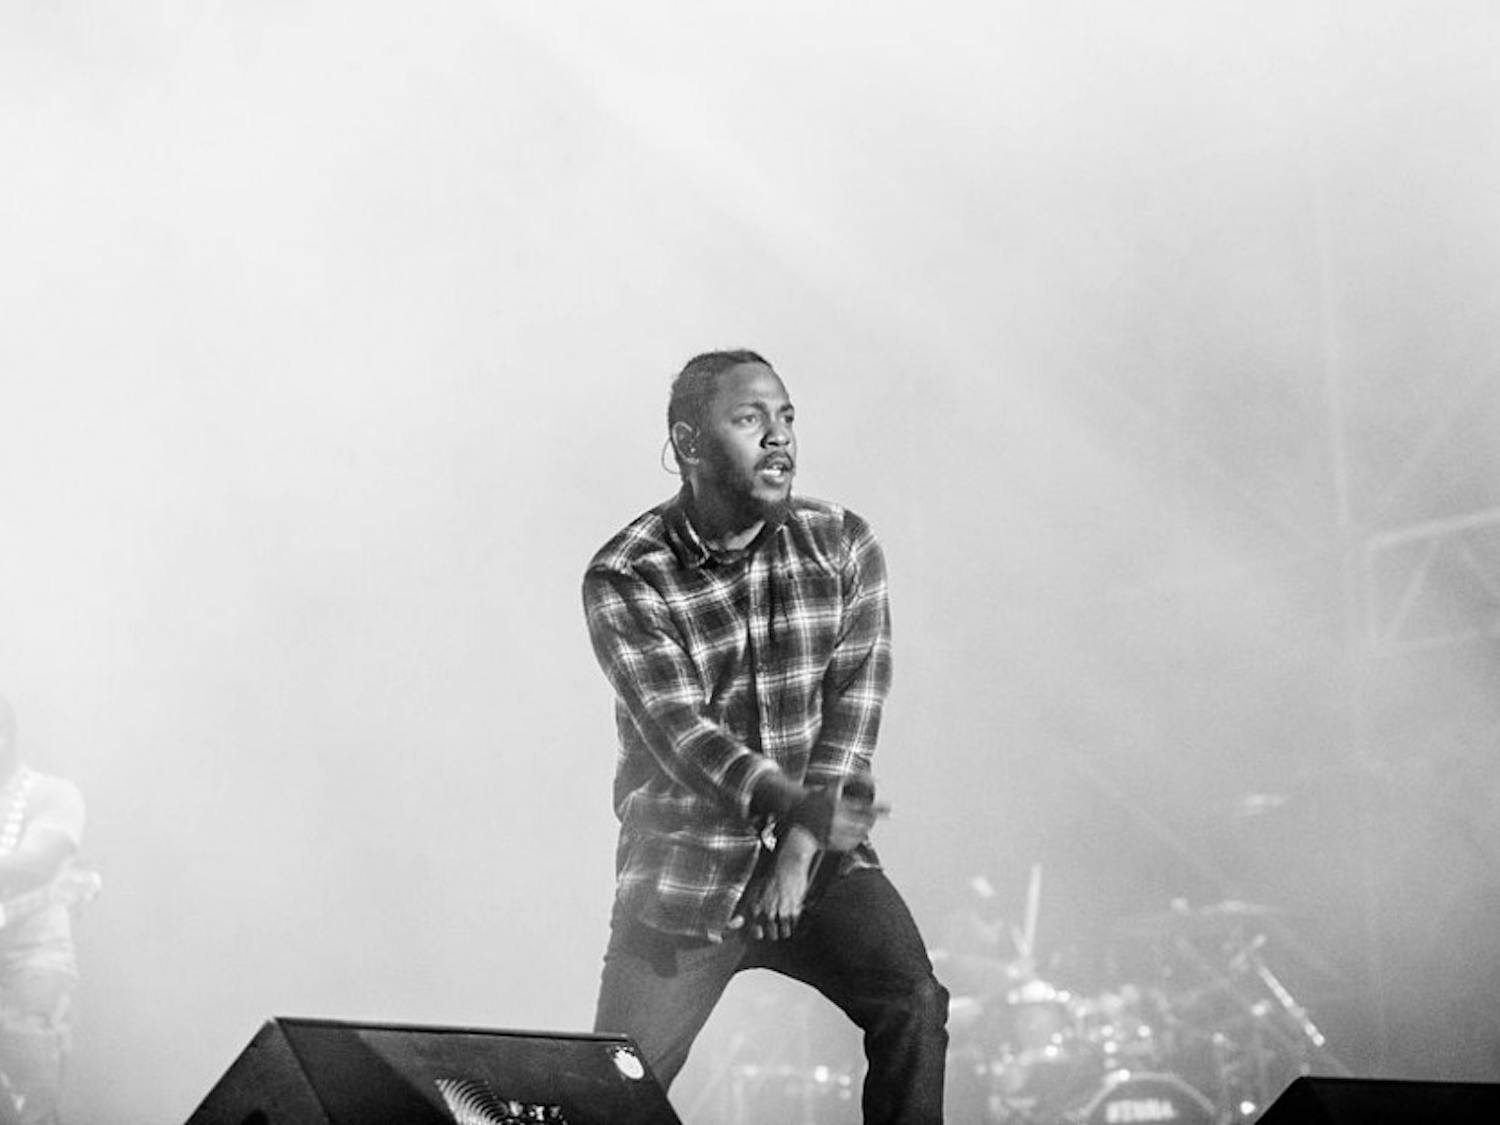 Two years after releasing "To Pimp a Butterfly," Kendrick Lamar dropped his much-anticipated fourth studio album "DAMN."